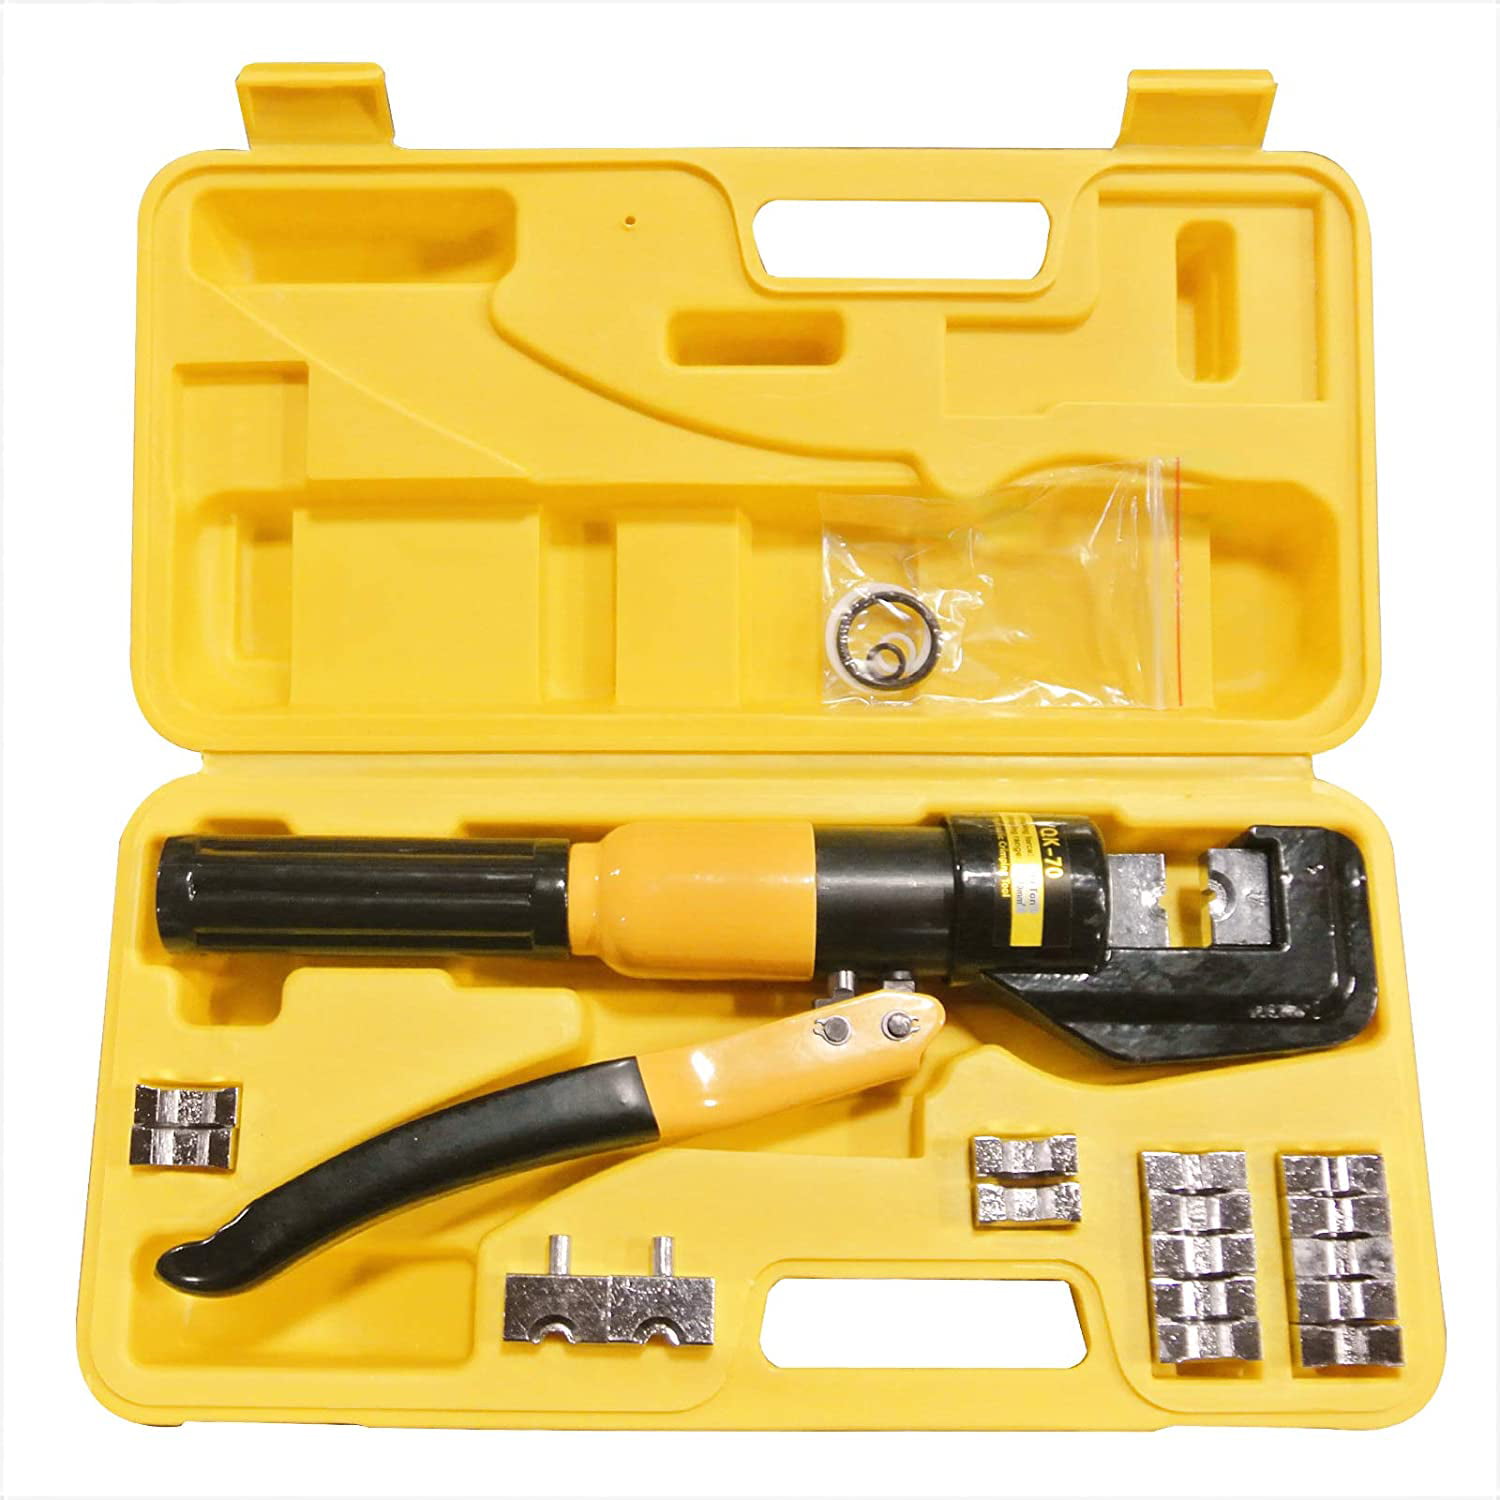 8 Ton Hydraulic Wire Crimper w/ 9 Dies Battery Cable Lug Terminal Crimping Tool 